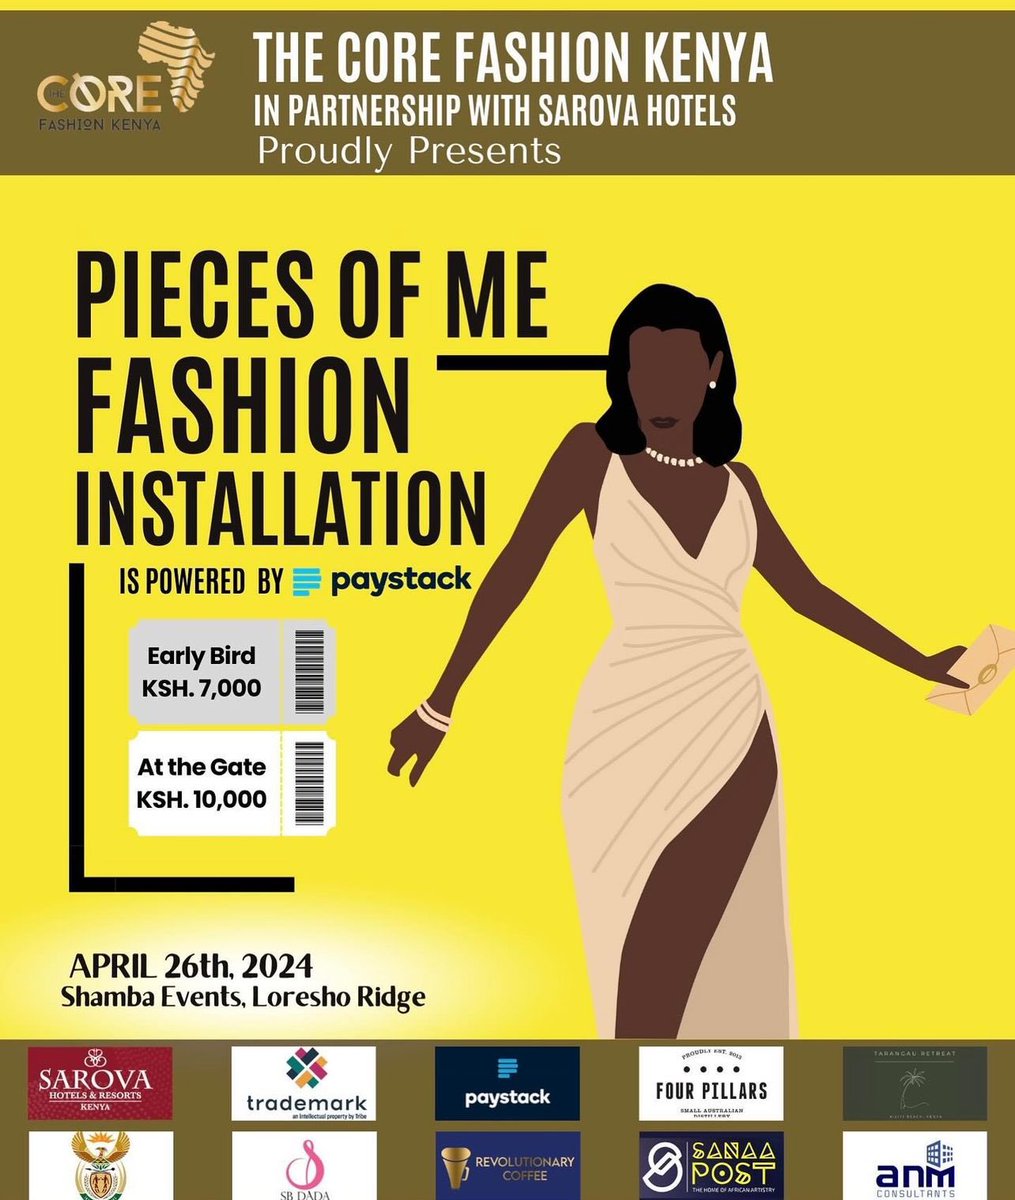 Don’t miss out on the highly anticipated “Pieces of Me Fashion Installation” presented by The Core Fashion Kenya. April 26th, 2024, at Shamba Events, Loresho Ridge. For more information, contact +254 703 894843. 🎫 mookh.com/event/the-core… #MookhExperience #MookhAfrica #Events